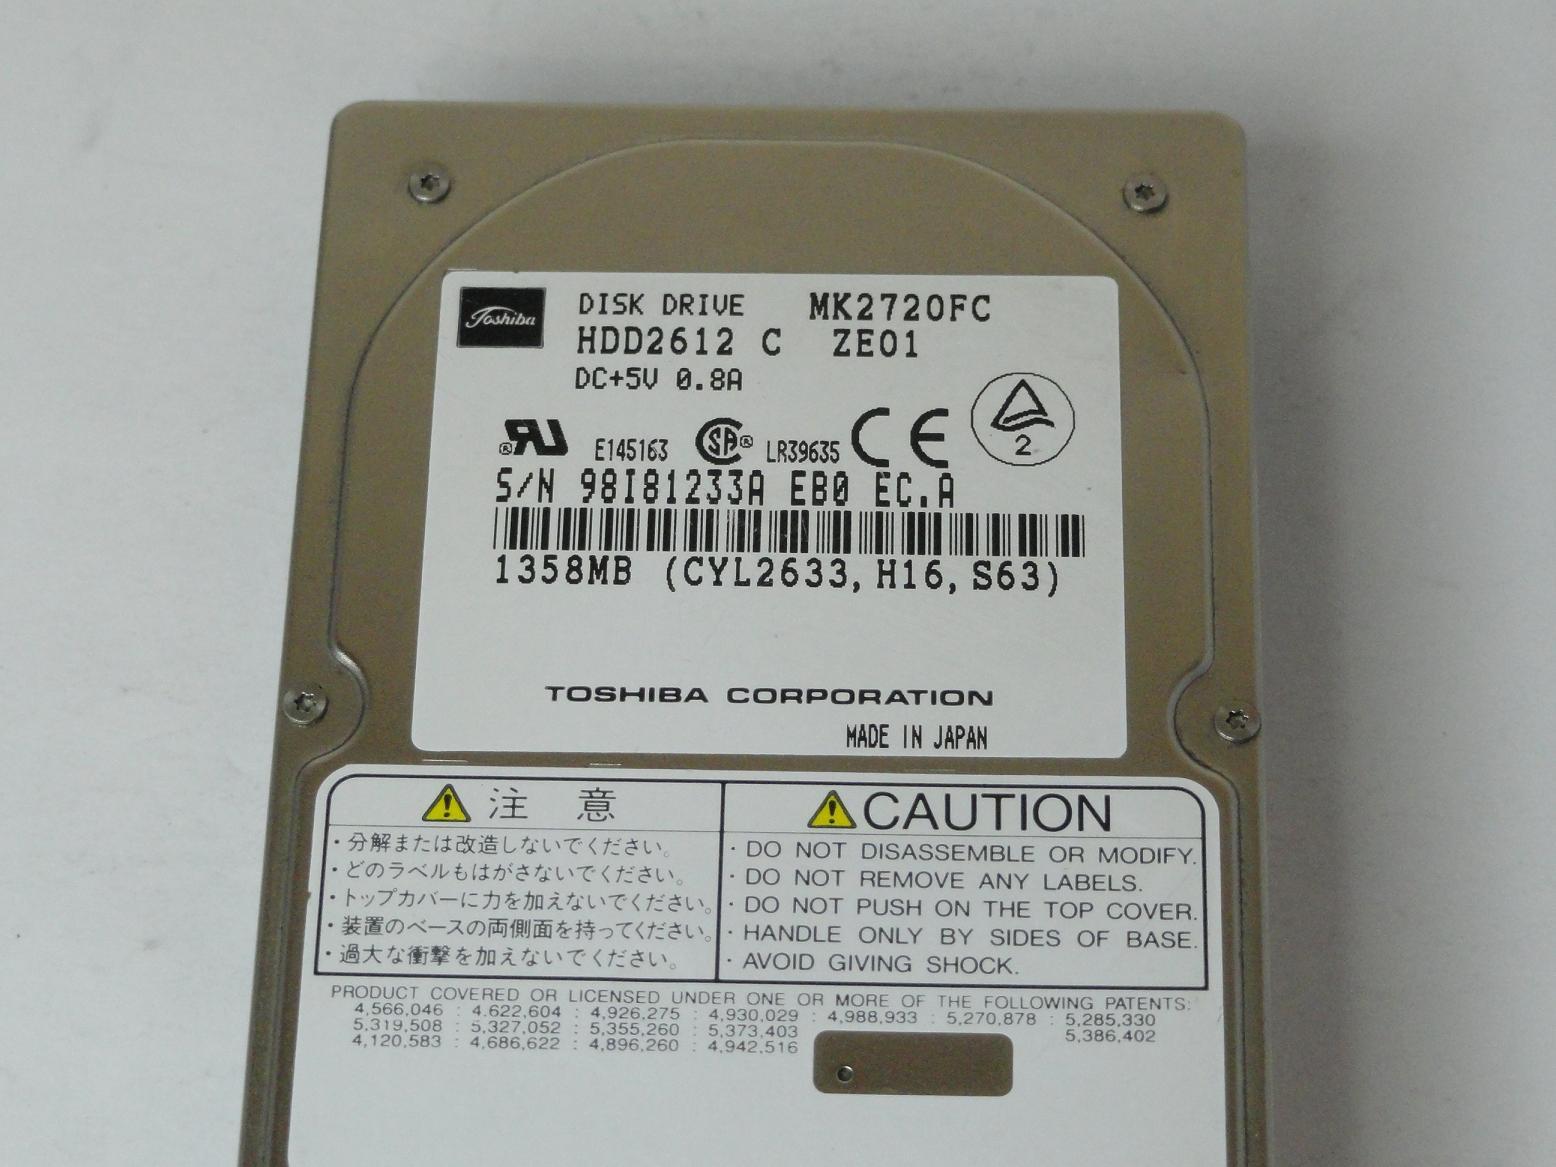 MC4320_HDD2612_Toshiba 1.35GB IDE 4200rpm 2.5in HDD - Image3